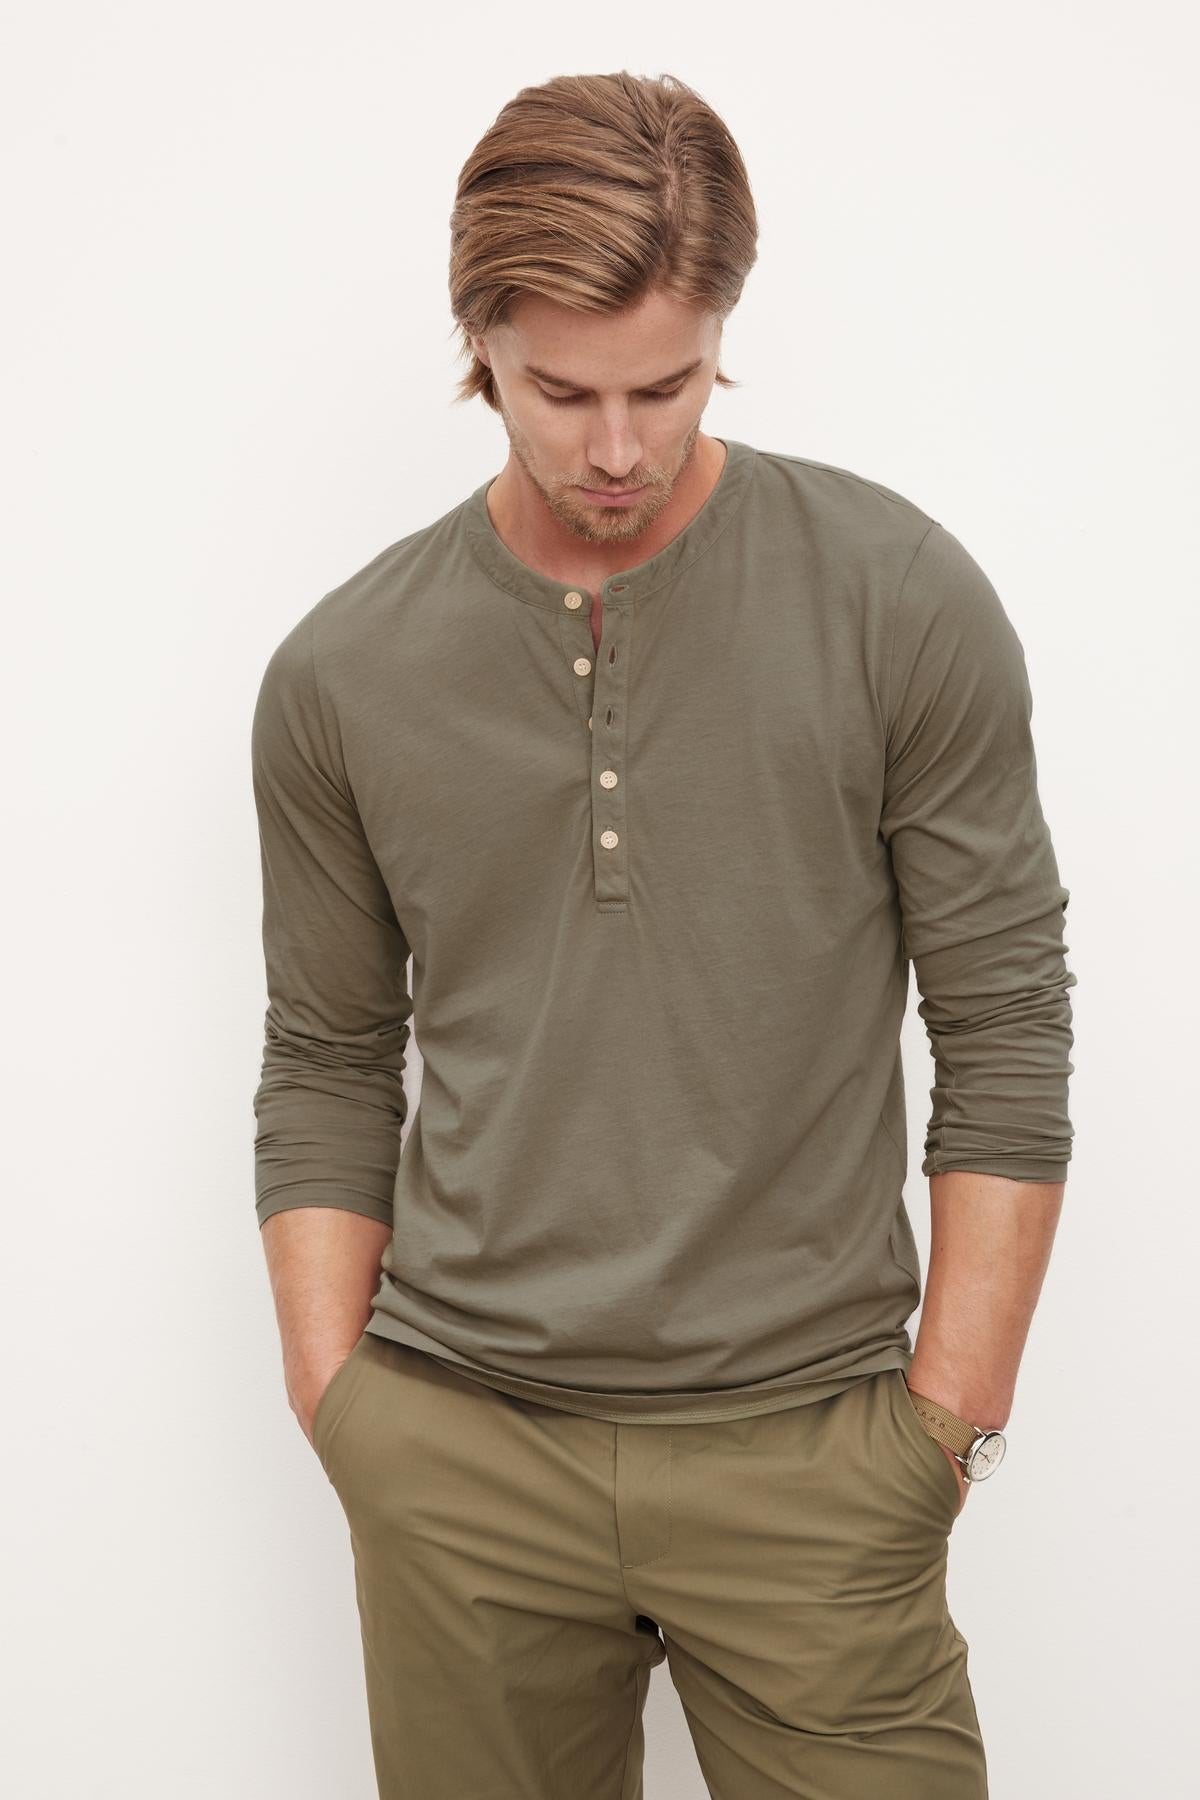 A man with light brown hair stands with hands in his pockets, looking down, wearing an olive green long-sleeve ALVARO HENLEY by Velvet by Graham & Spencer crafted from whisper knit material and matching pants against a plain white background.-36009056469185